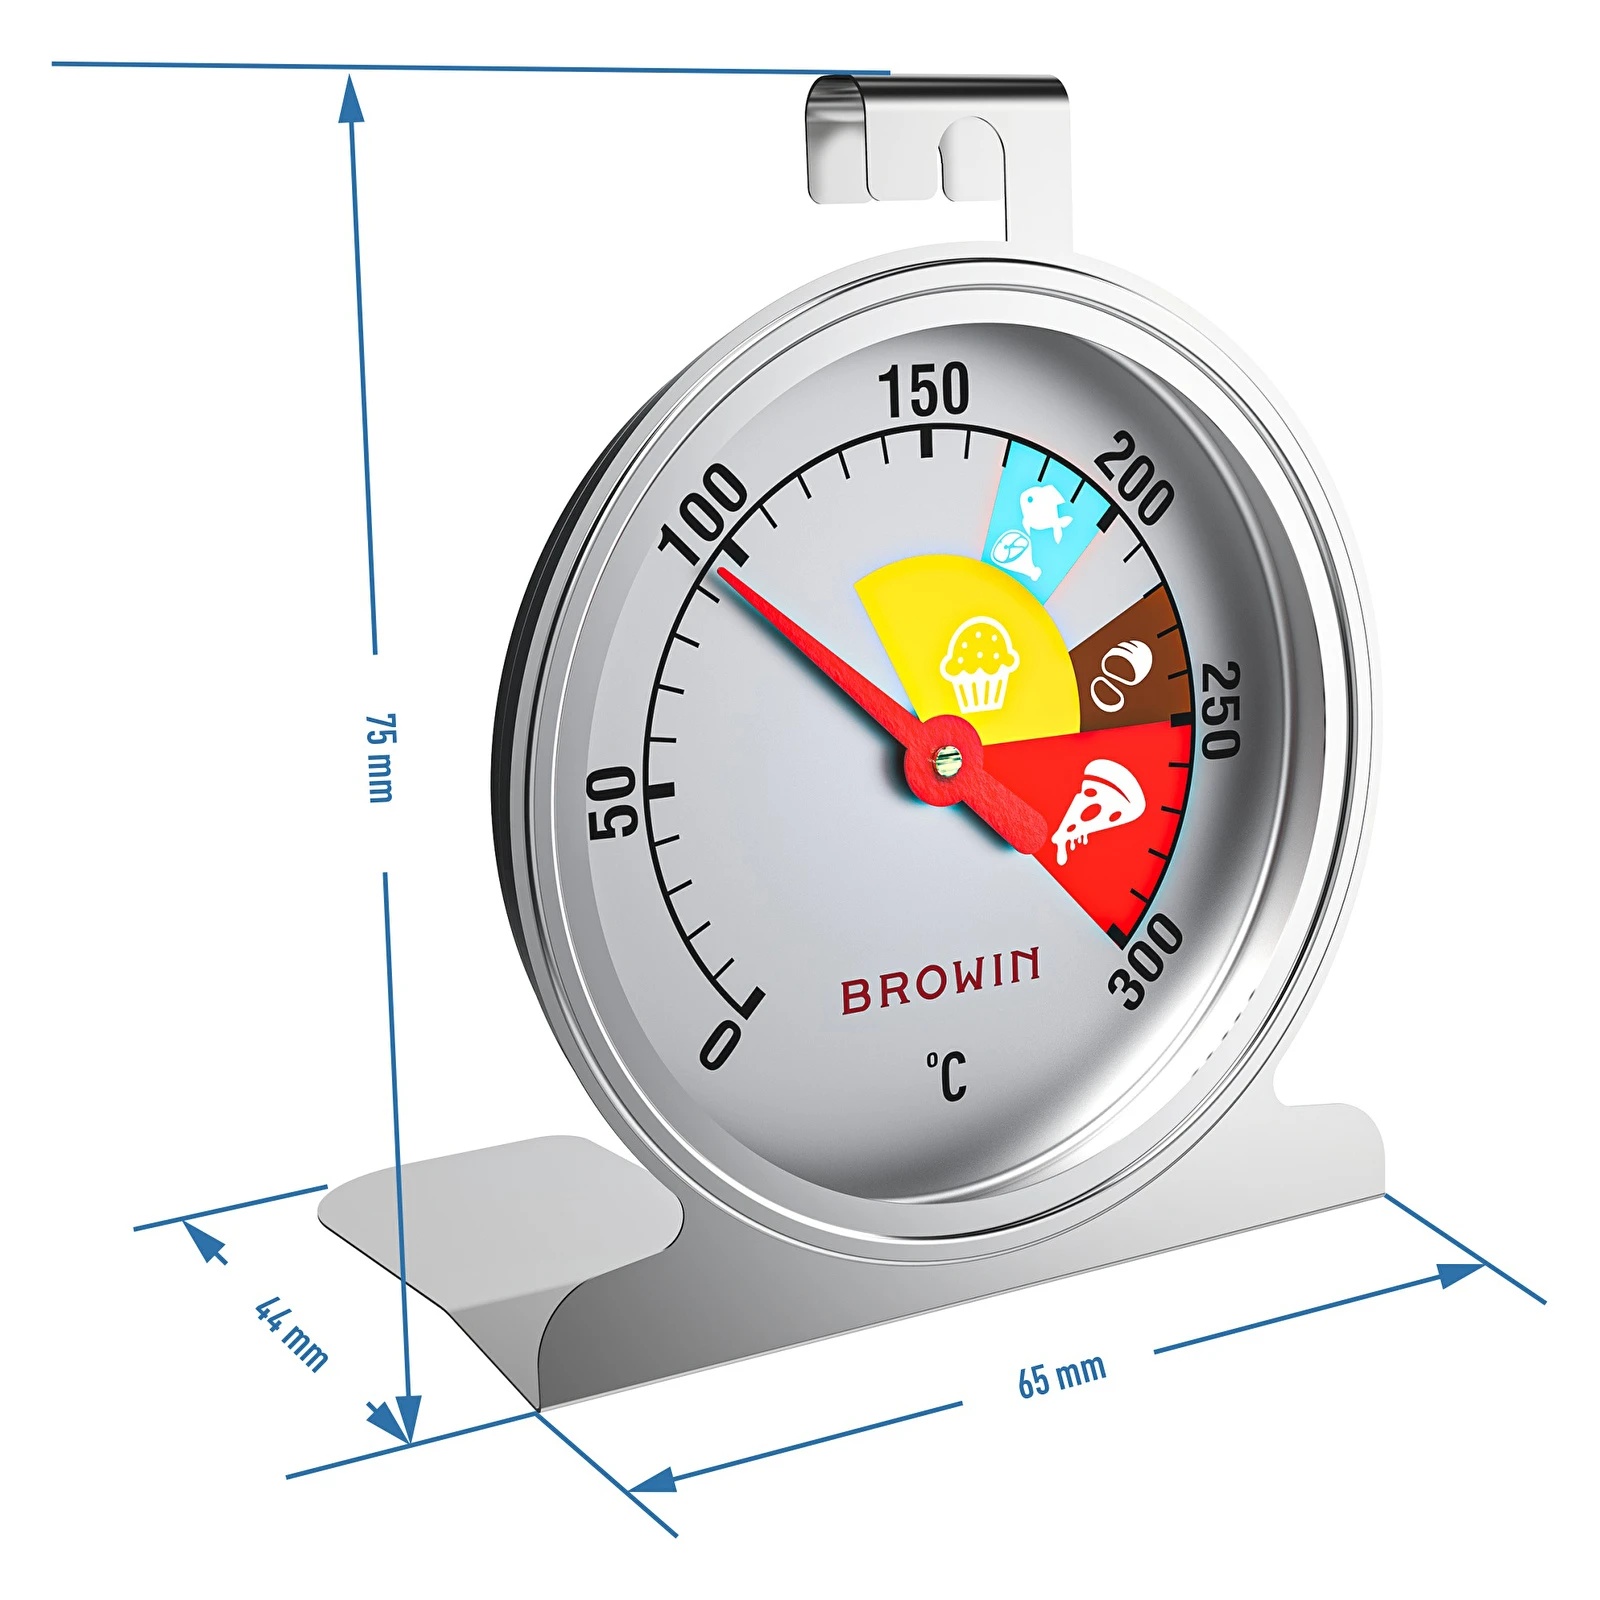 https://browin.com/static/images/1600/oven-thermometer-0-c-300-c-100502_wym.webp